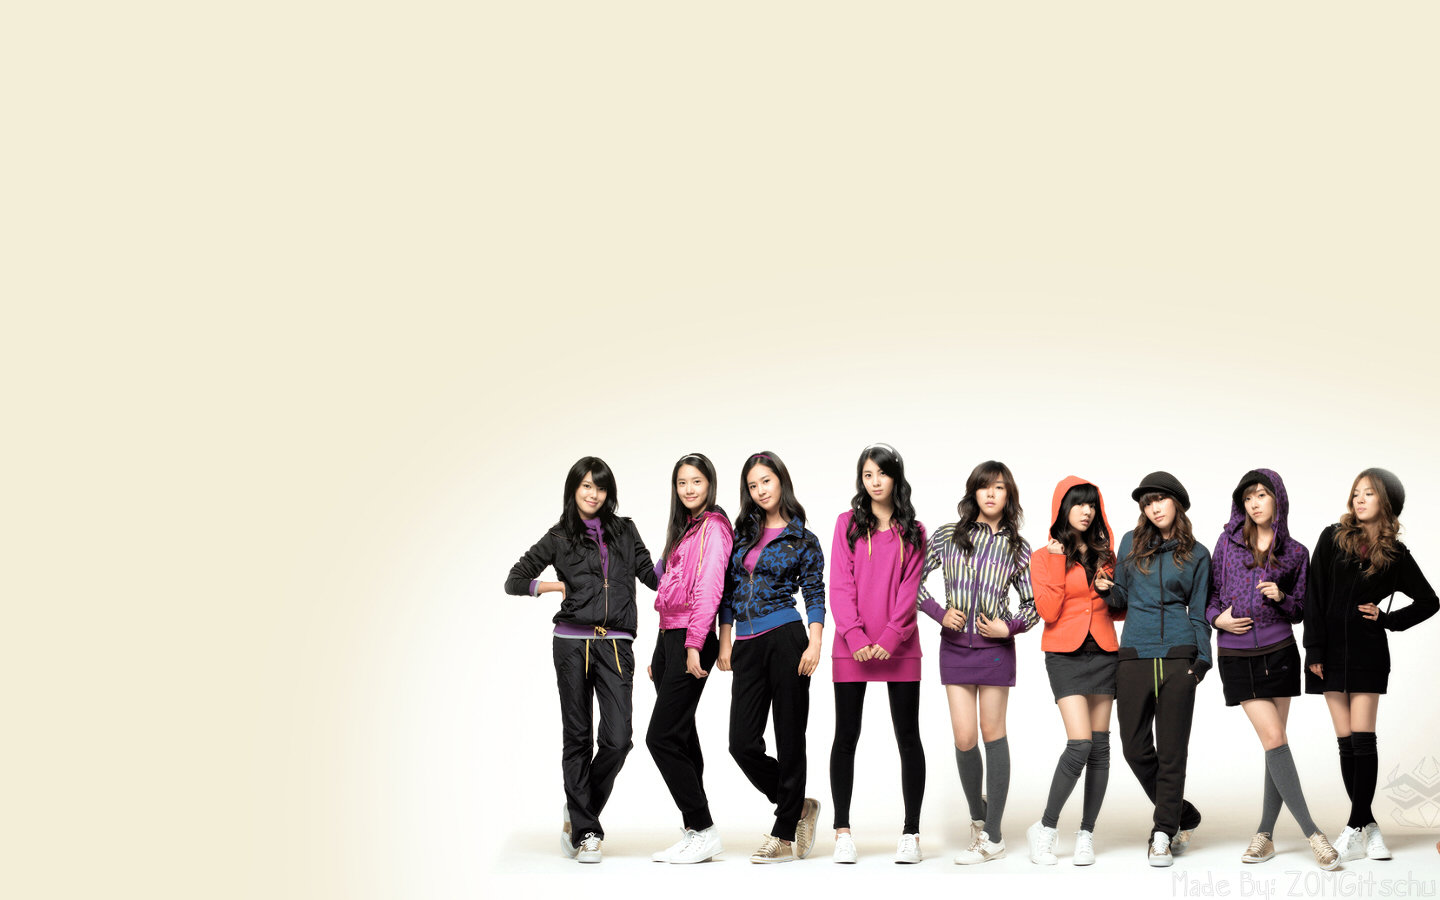 Download hd 1440x900 SNSD (Girls generation) desktop background ID:192943 for free